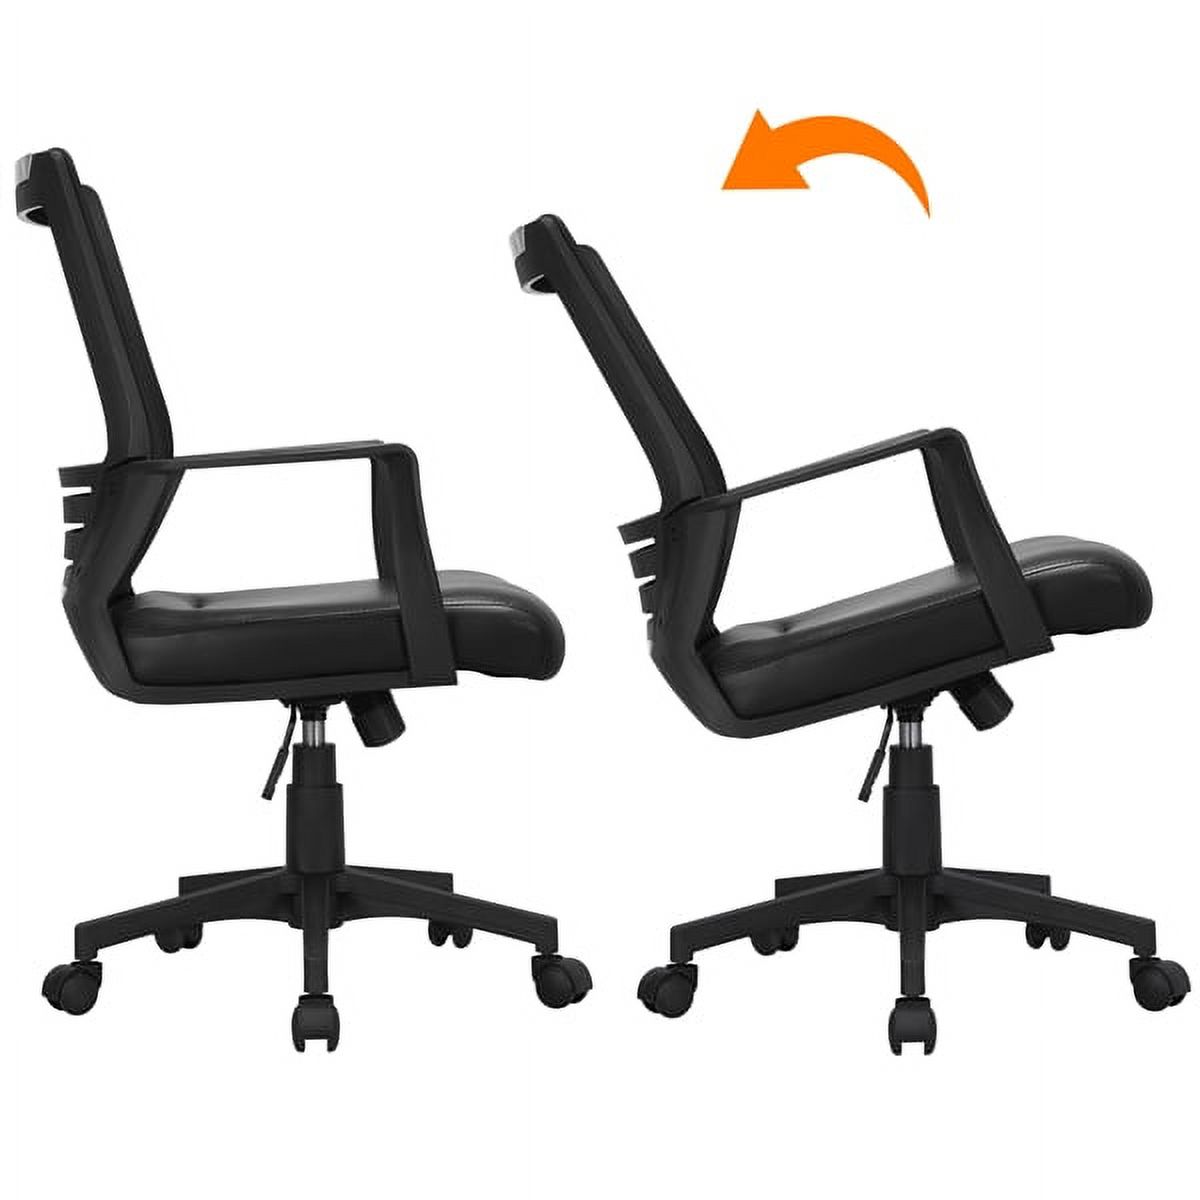 Smile Mart Adjustable Midback Ergonomic Mesh Office Chair with Lumbar Support, Black Seat - image 5 of 19